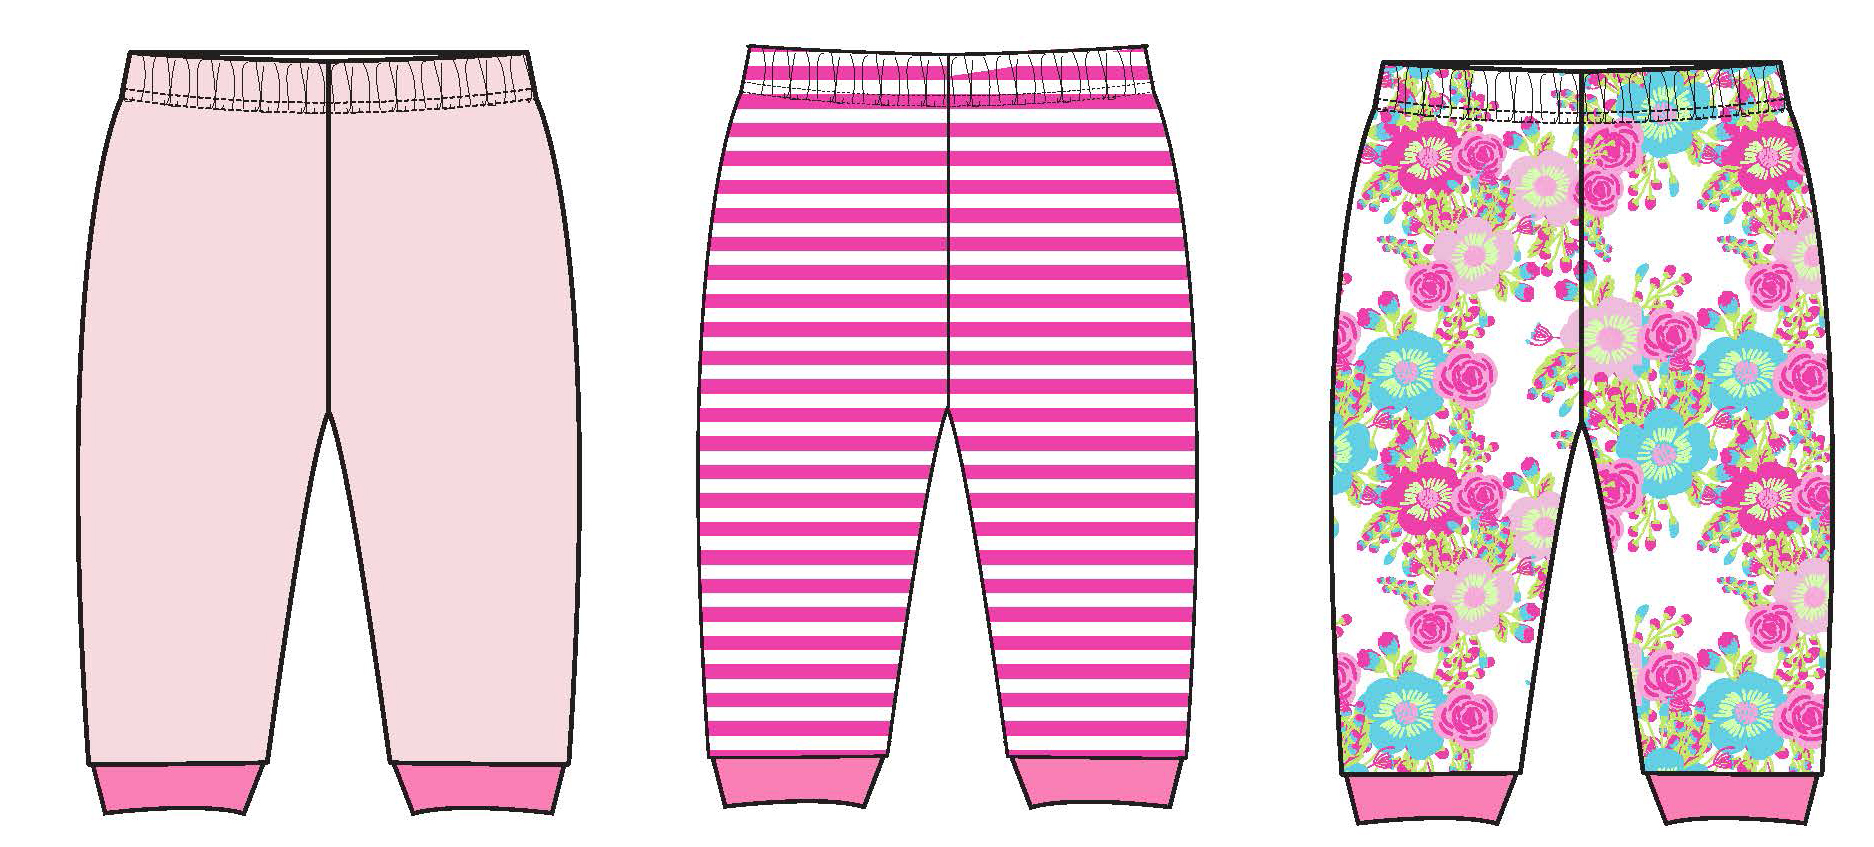 ''Baby Girl's Printed Pull-On PANTS w/ Solid, Floral, & Striped Print - 3-Pack''